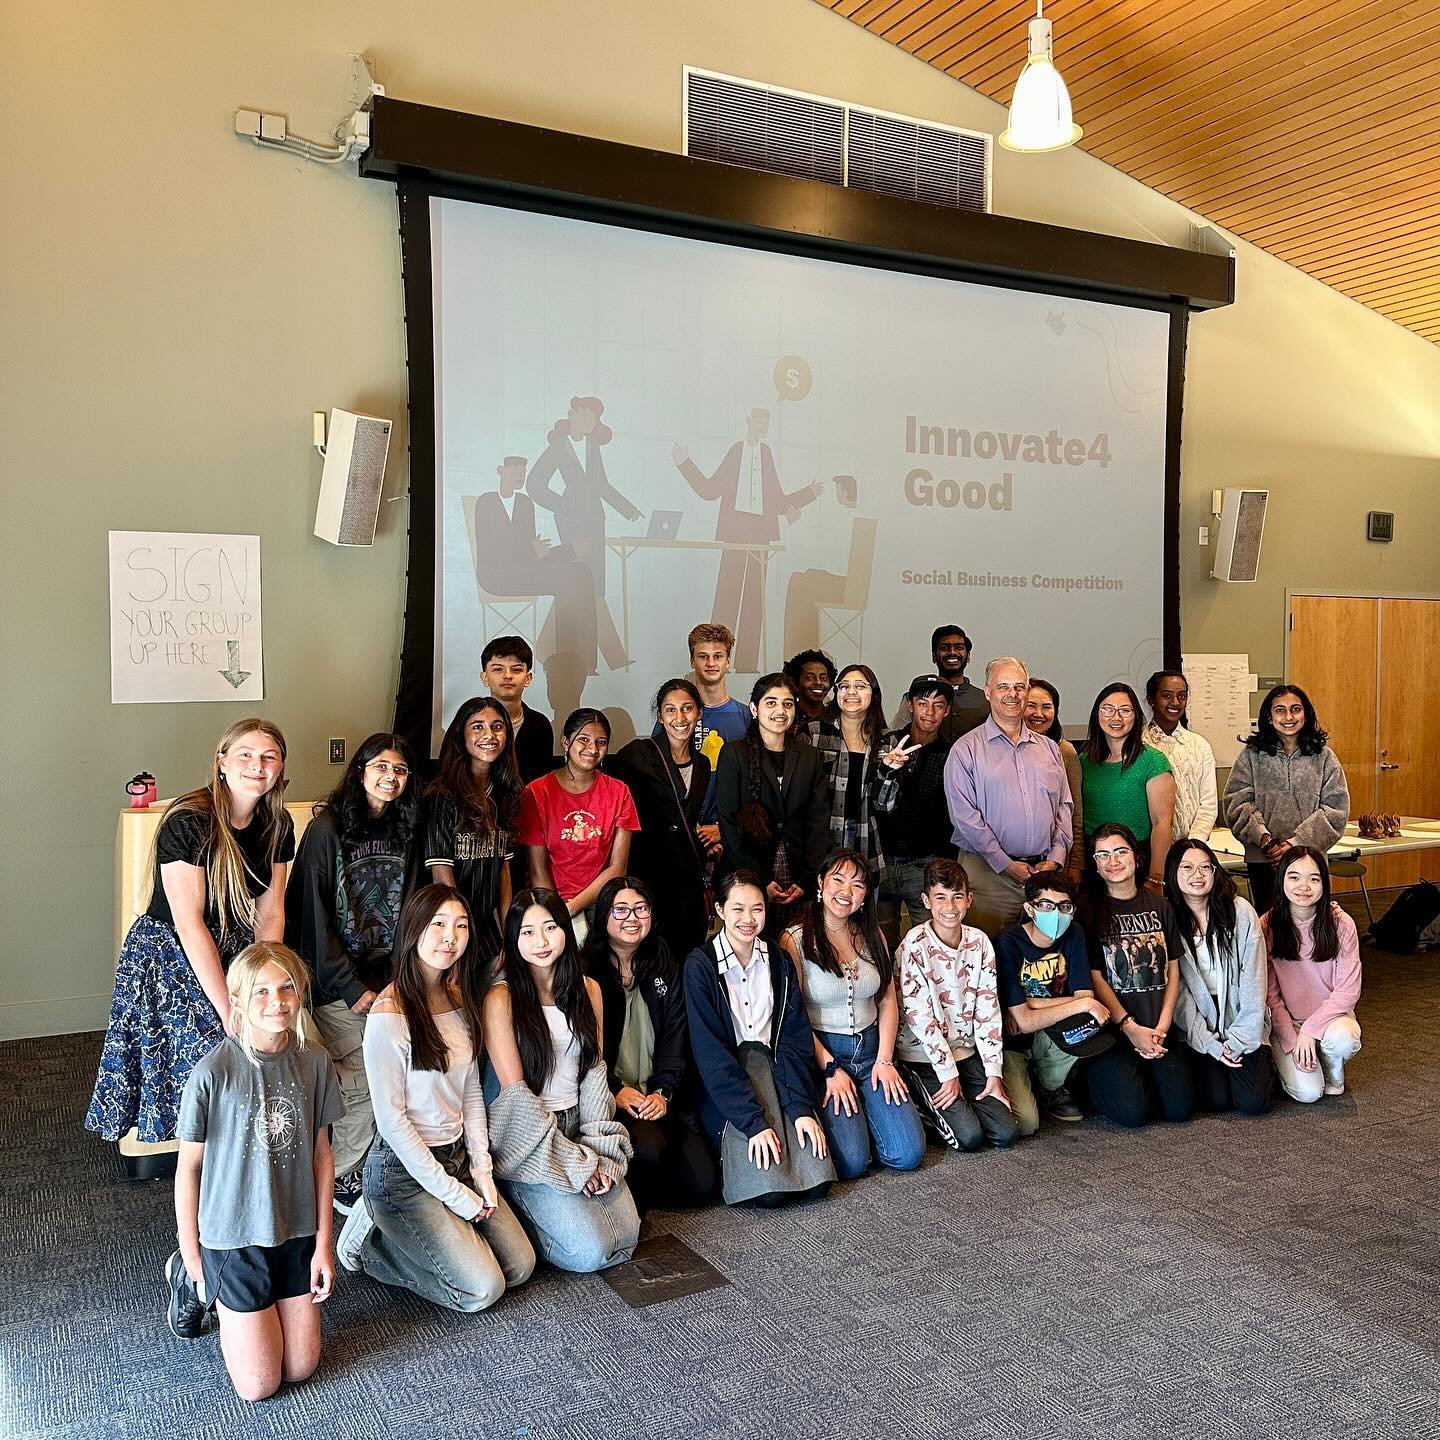 The District 4 Youth Advisory Council, Youth Commissioner Thy Luong, and the San Jos&eacute; Youth Commission sparked innovation at INNOVATE4GOOD! This event united District 4 students in a business competition, fostering passion for entrepreneurship